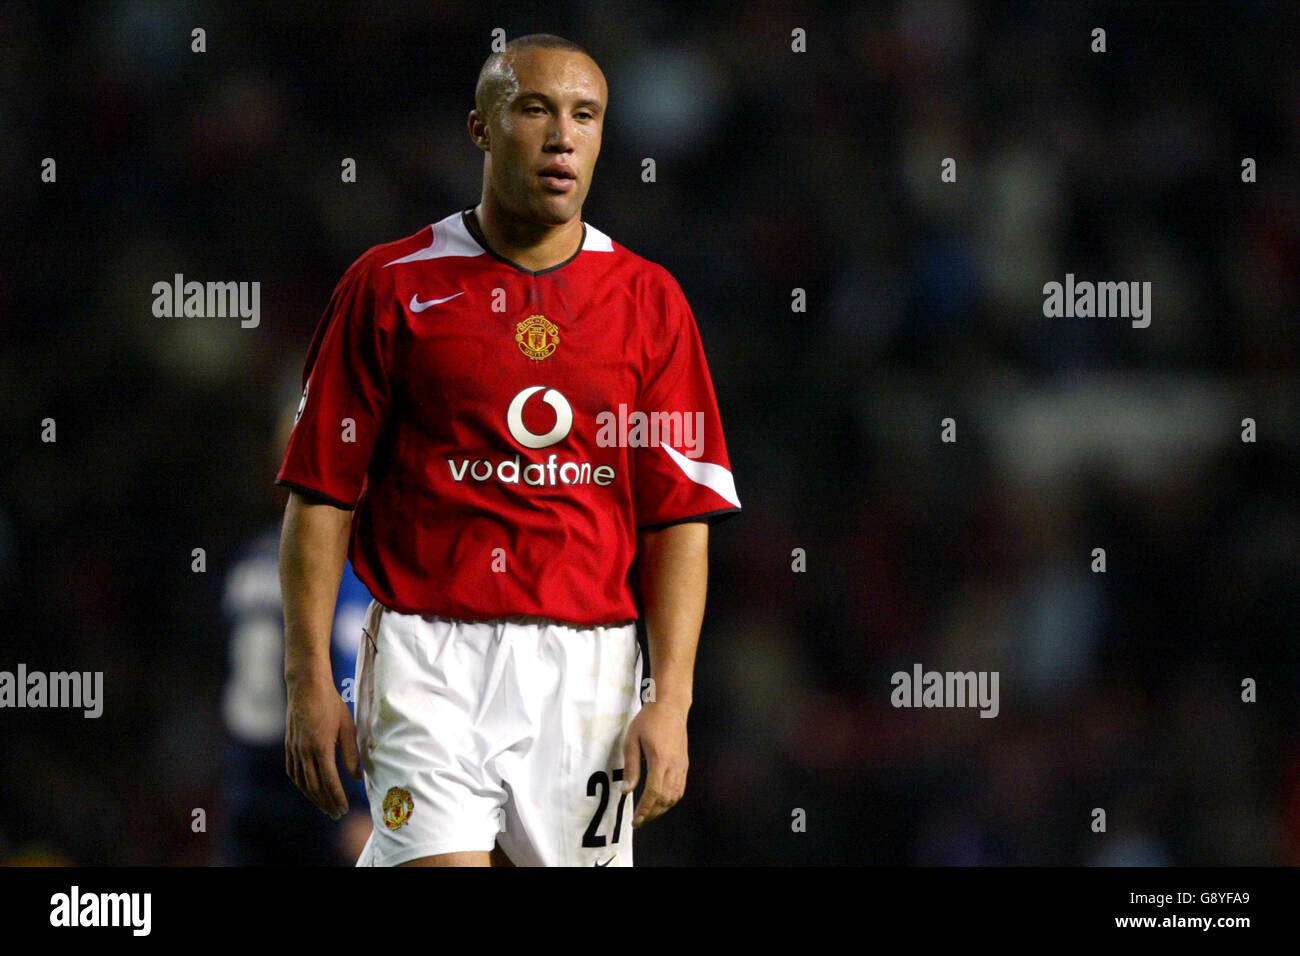 Soccer - UEFA Champions League - Group D - Manchester United v Lille - Old Trafford. Mikael Silvestre, Manchester United Stock Photo